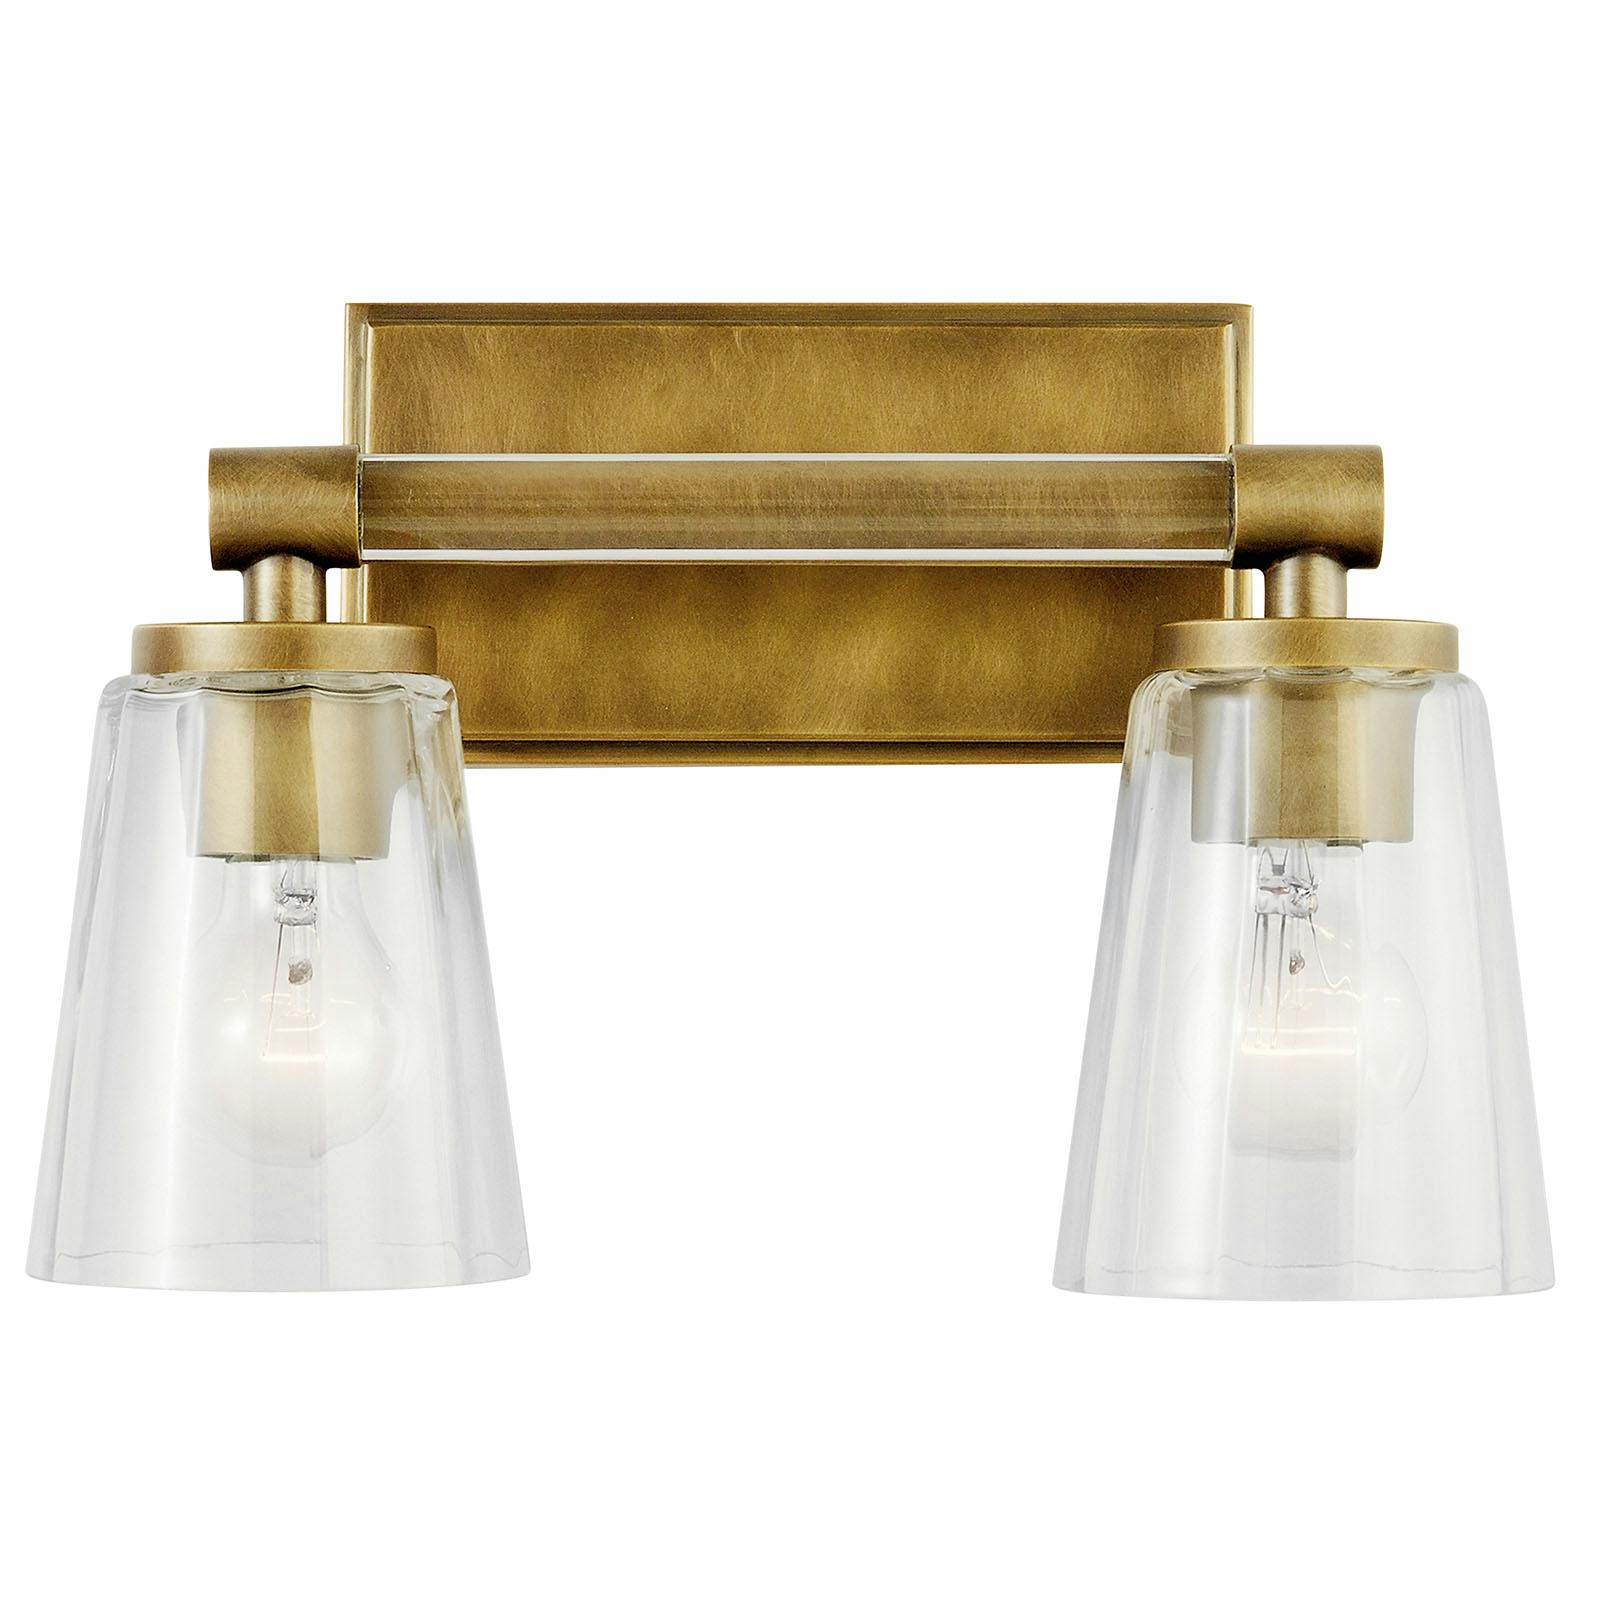 The Audrea 2 Light Vanity Light Natural Brass facing down on a white background